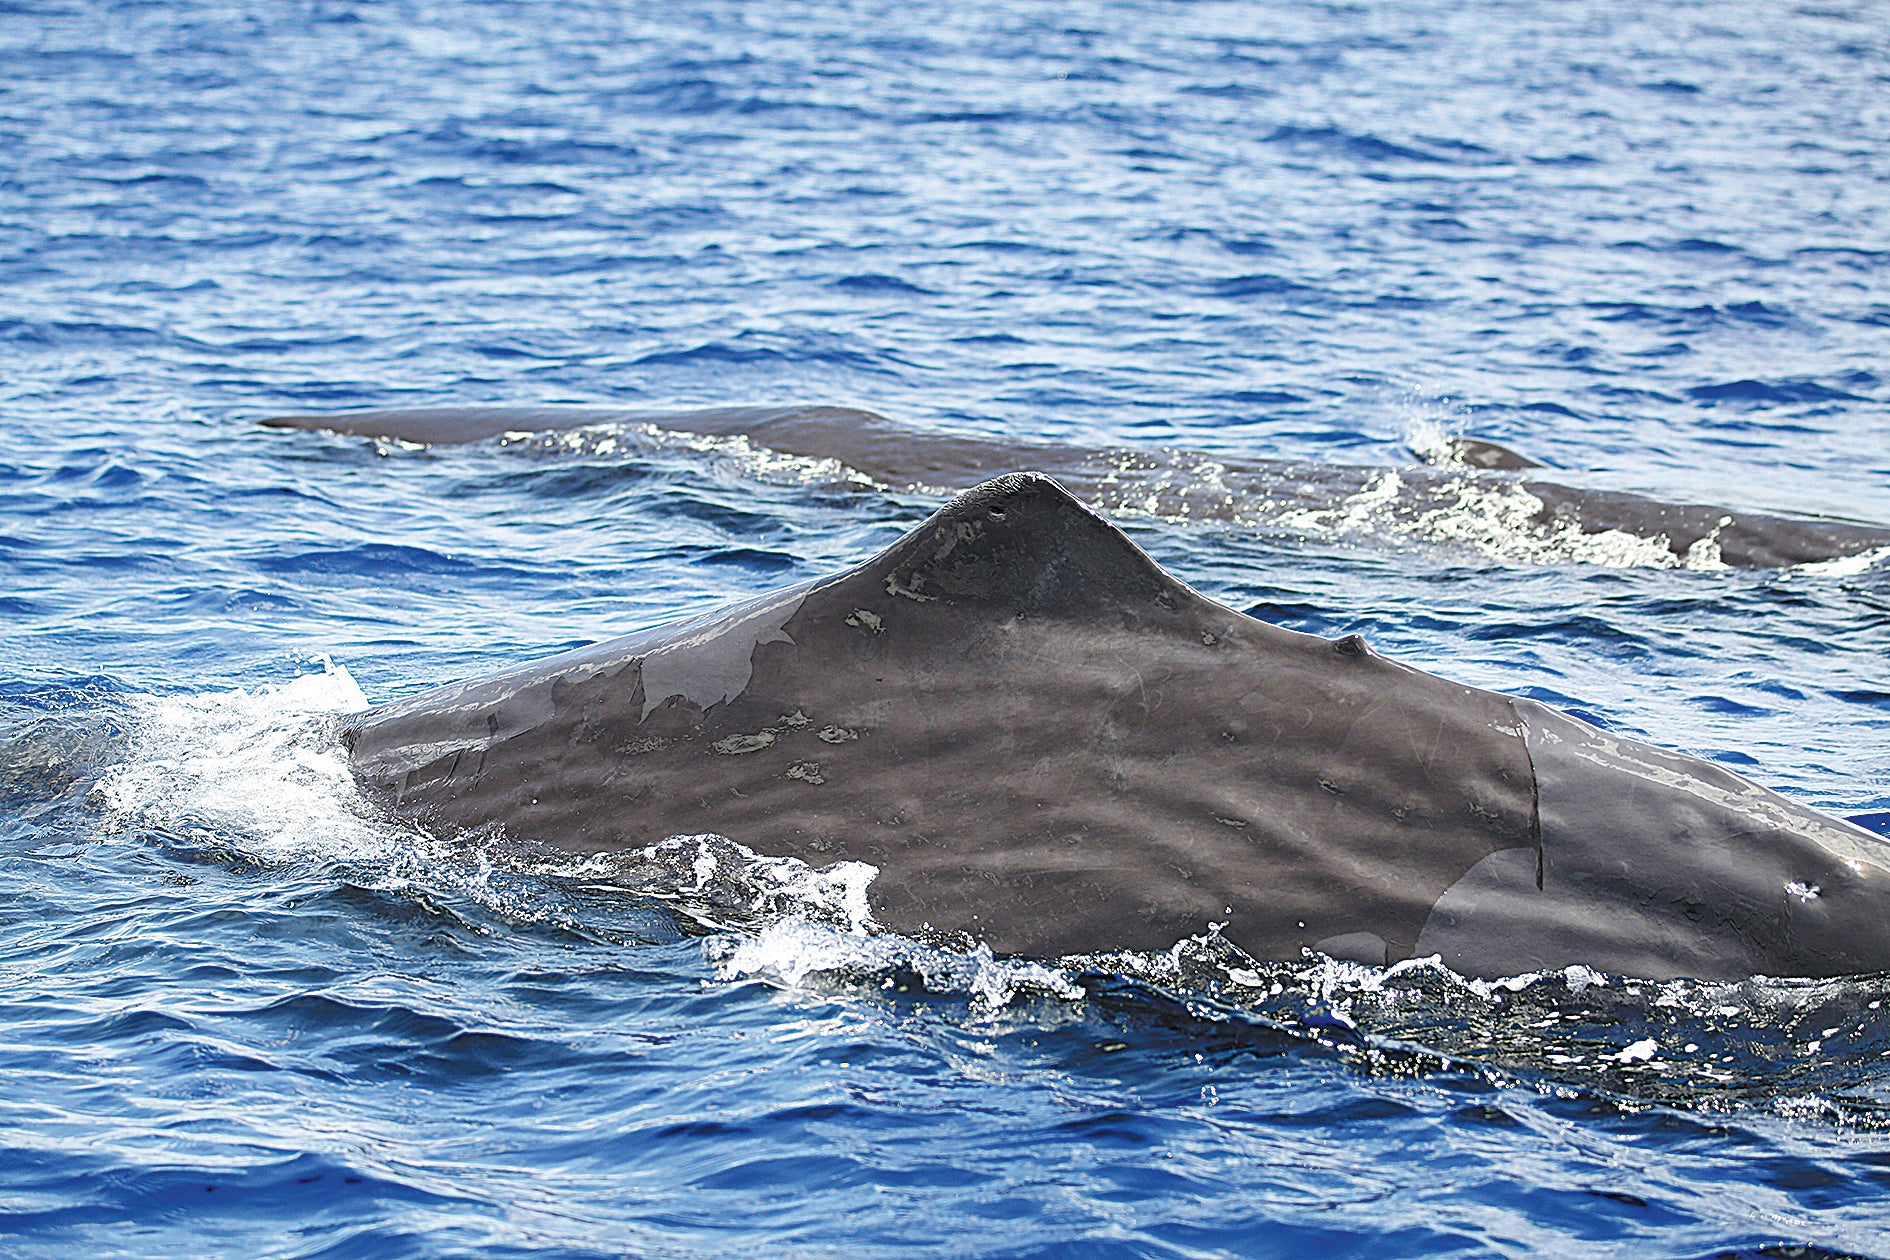 Nine groups of sperm whales were sighted in northern areas of the South China Sea from 2019 to 2021